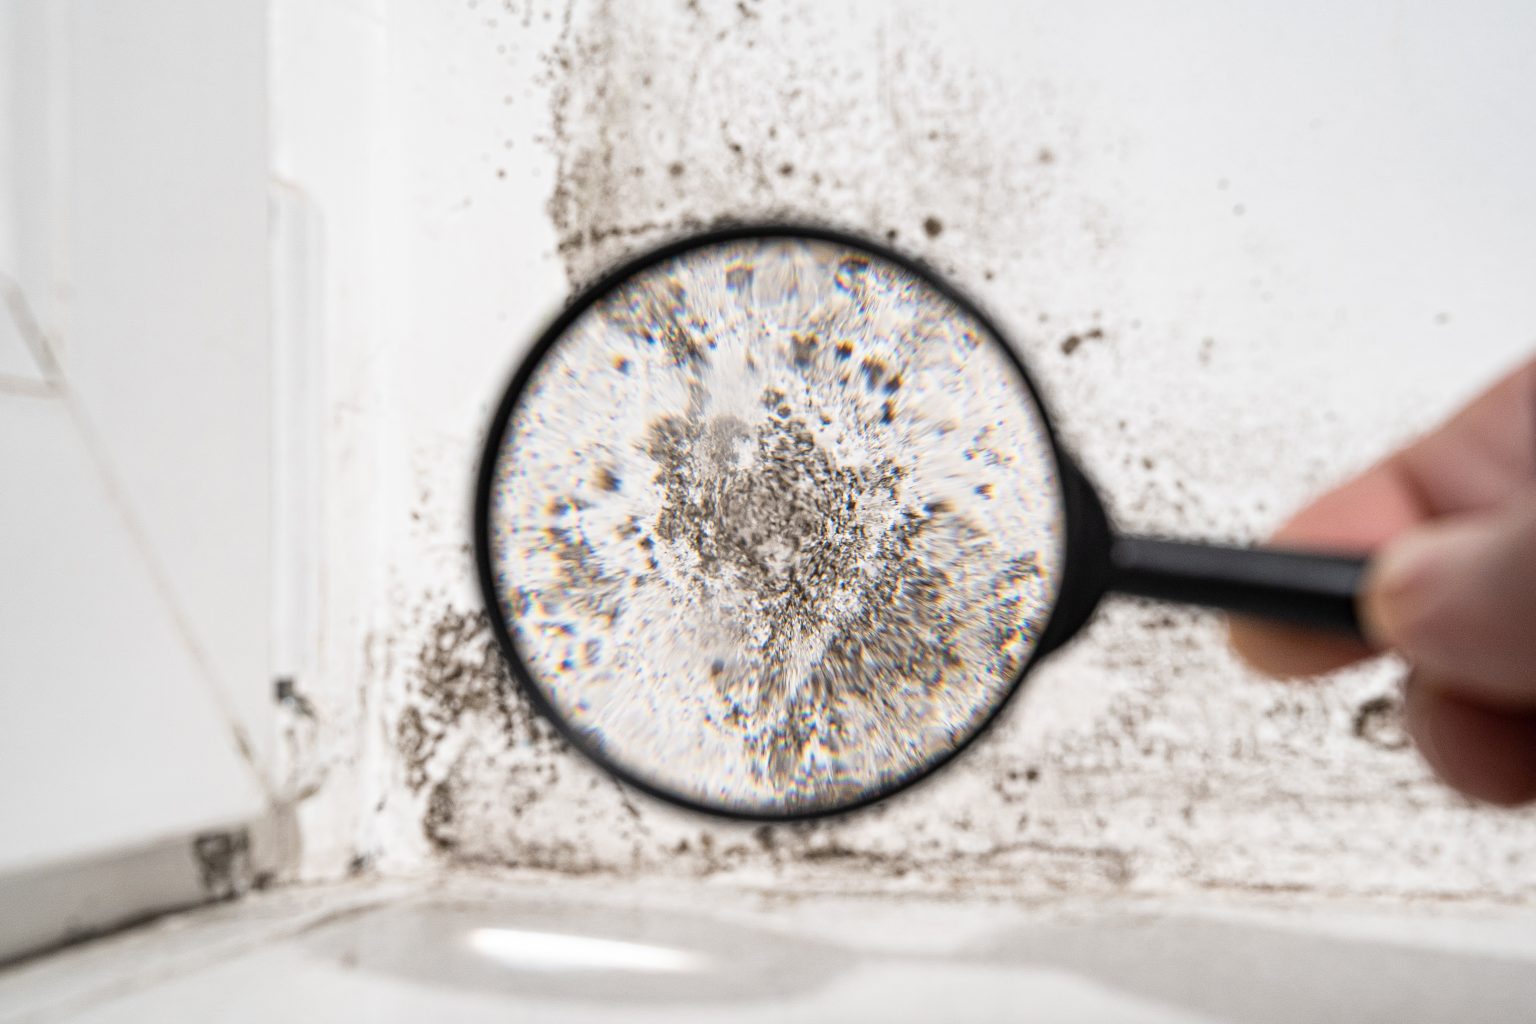 How to Remove Mold From Your Home